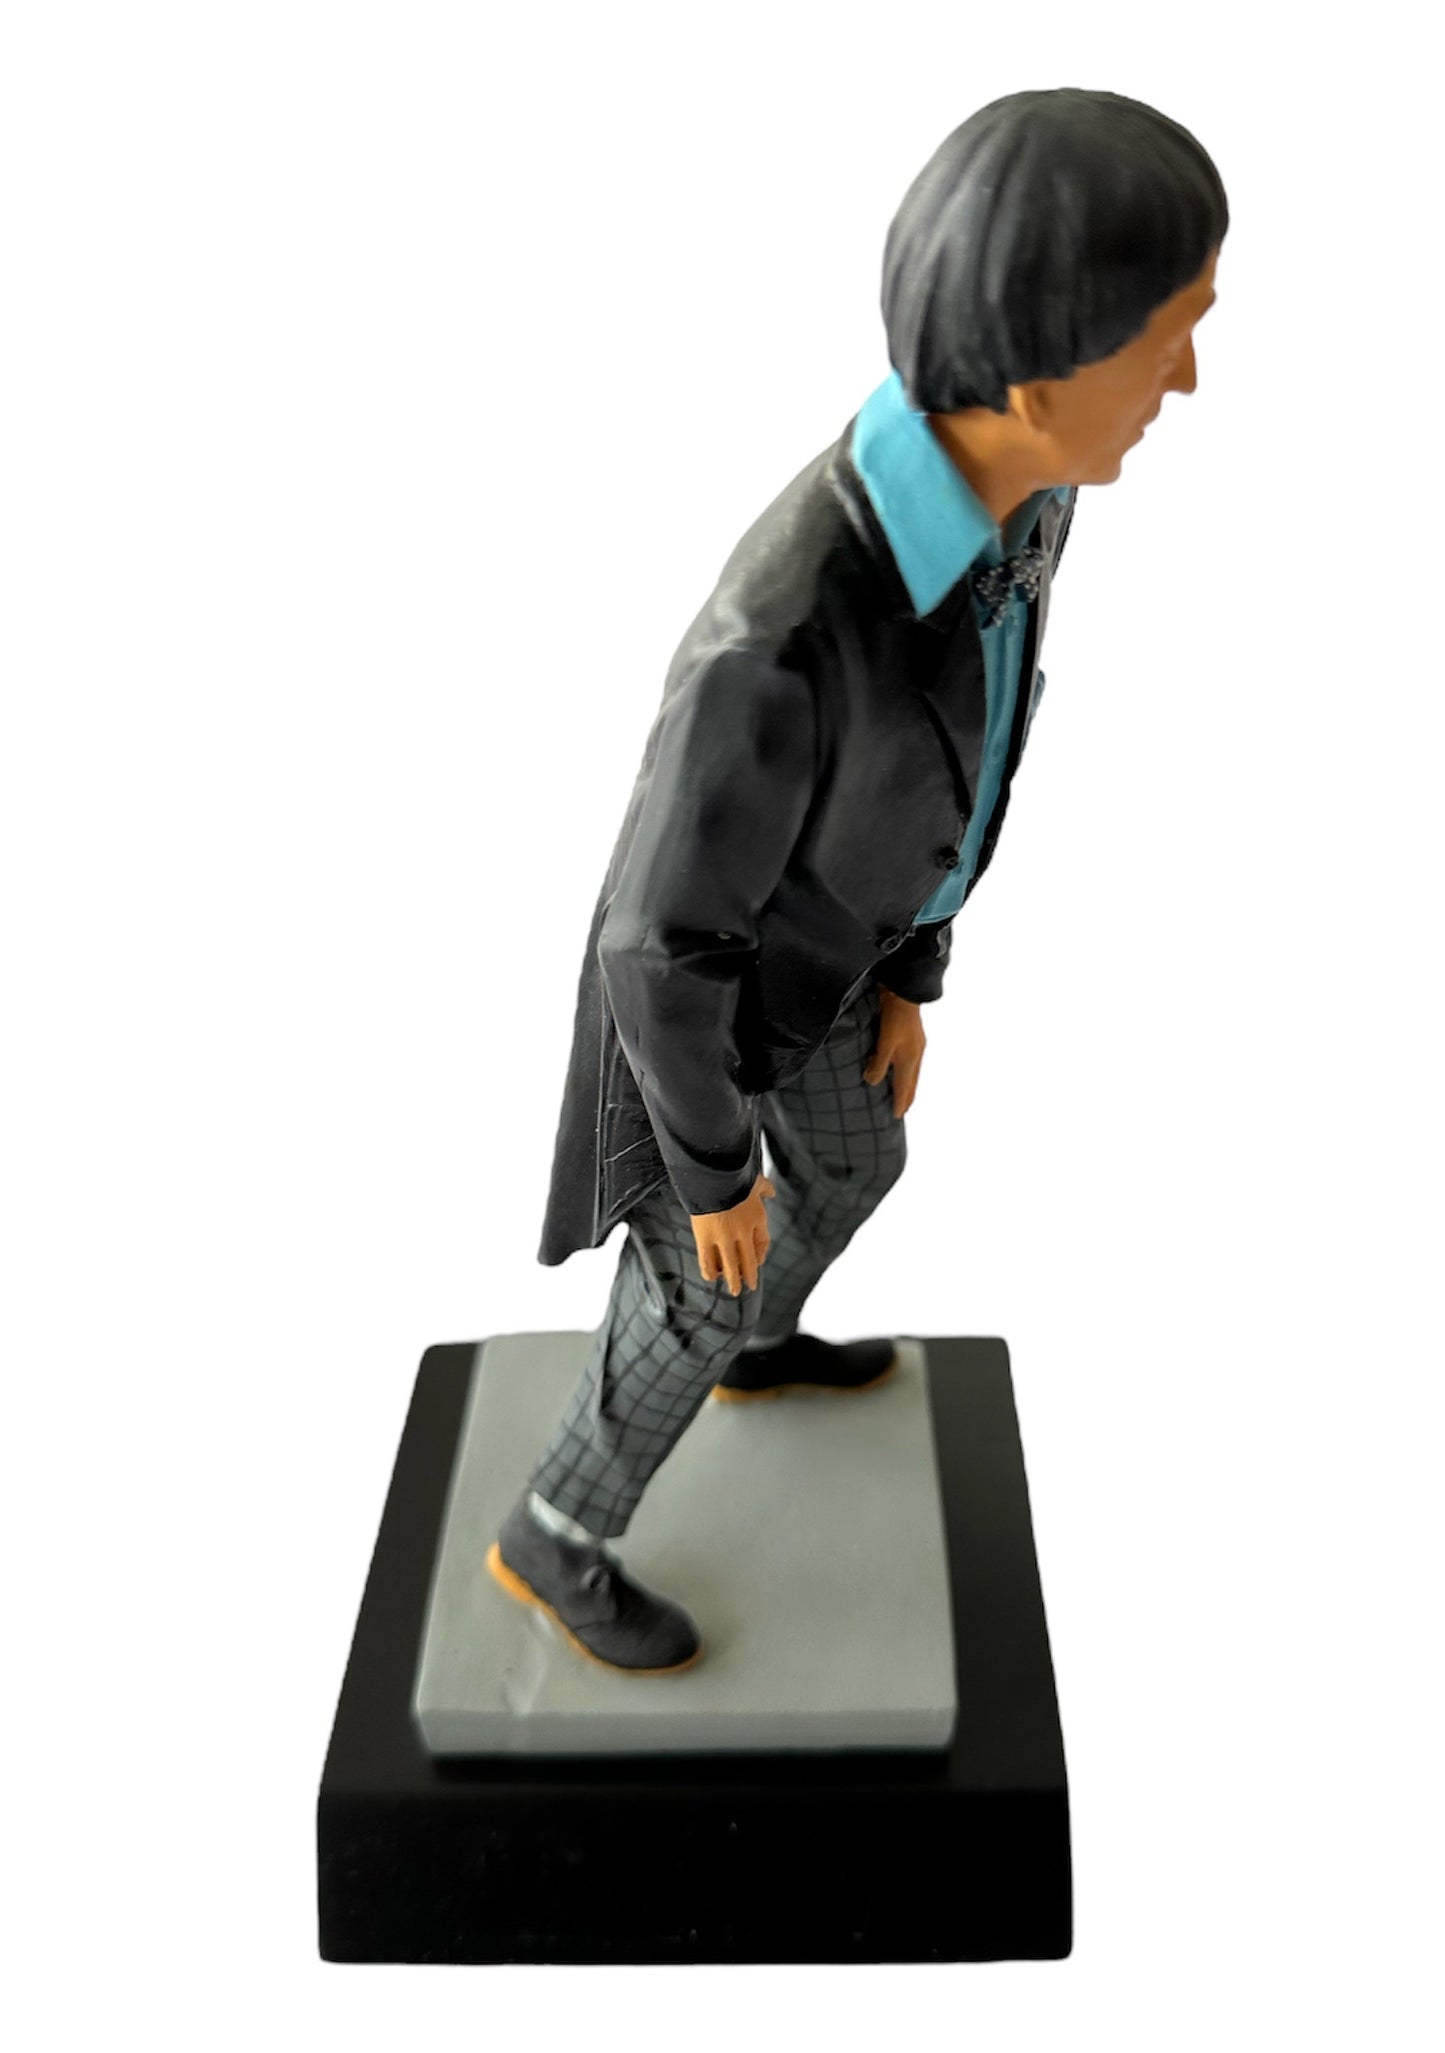 Dr Who The 2nd Doctor Patrick Troughton Classic Sheercast Hand Painted Limited Edition 8 Inch Figurine